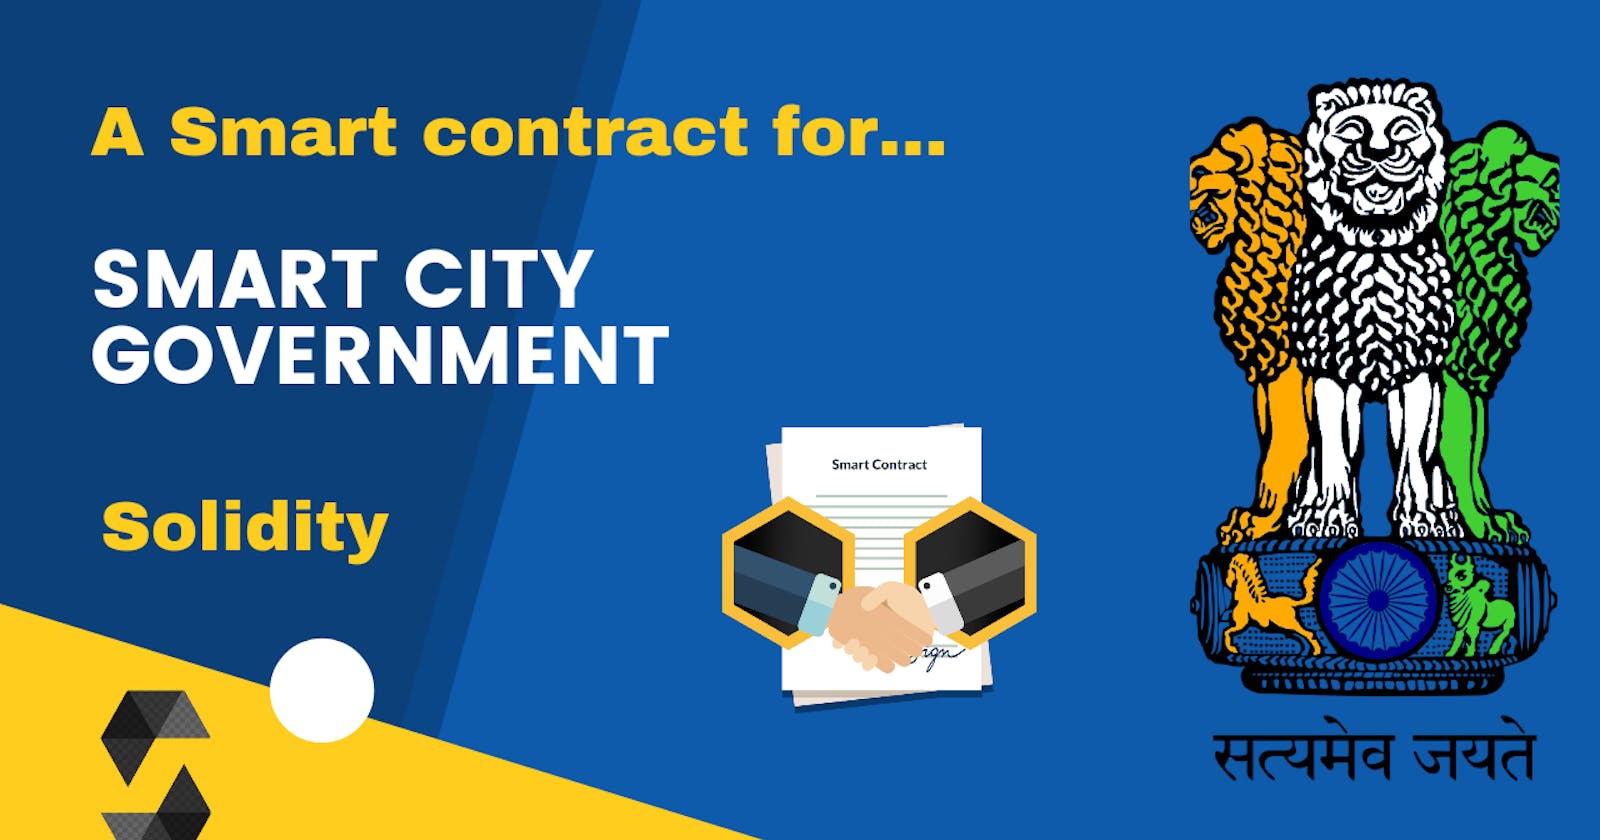 A smart contract for a Smart City Government (Solidity)